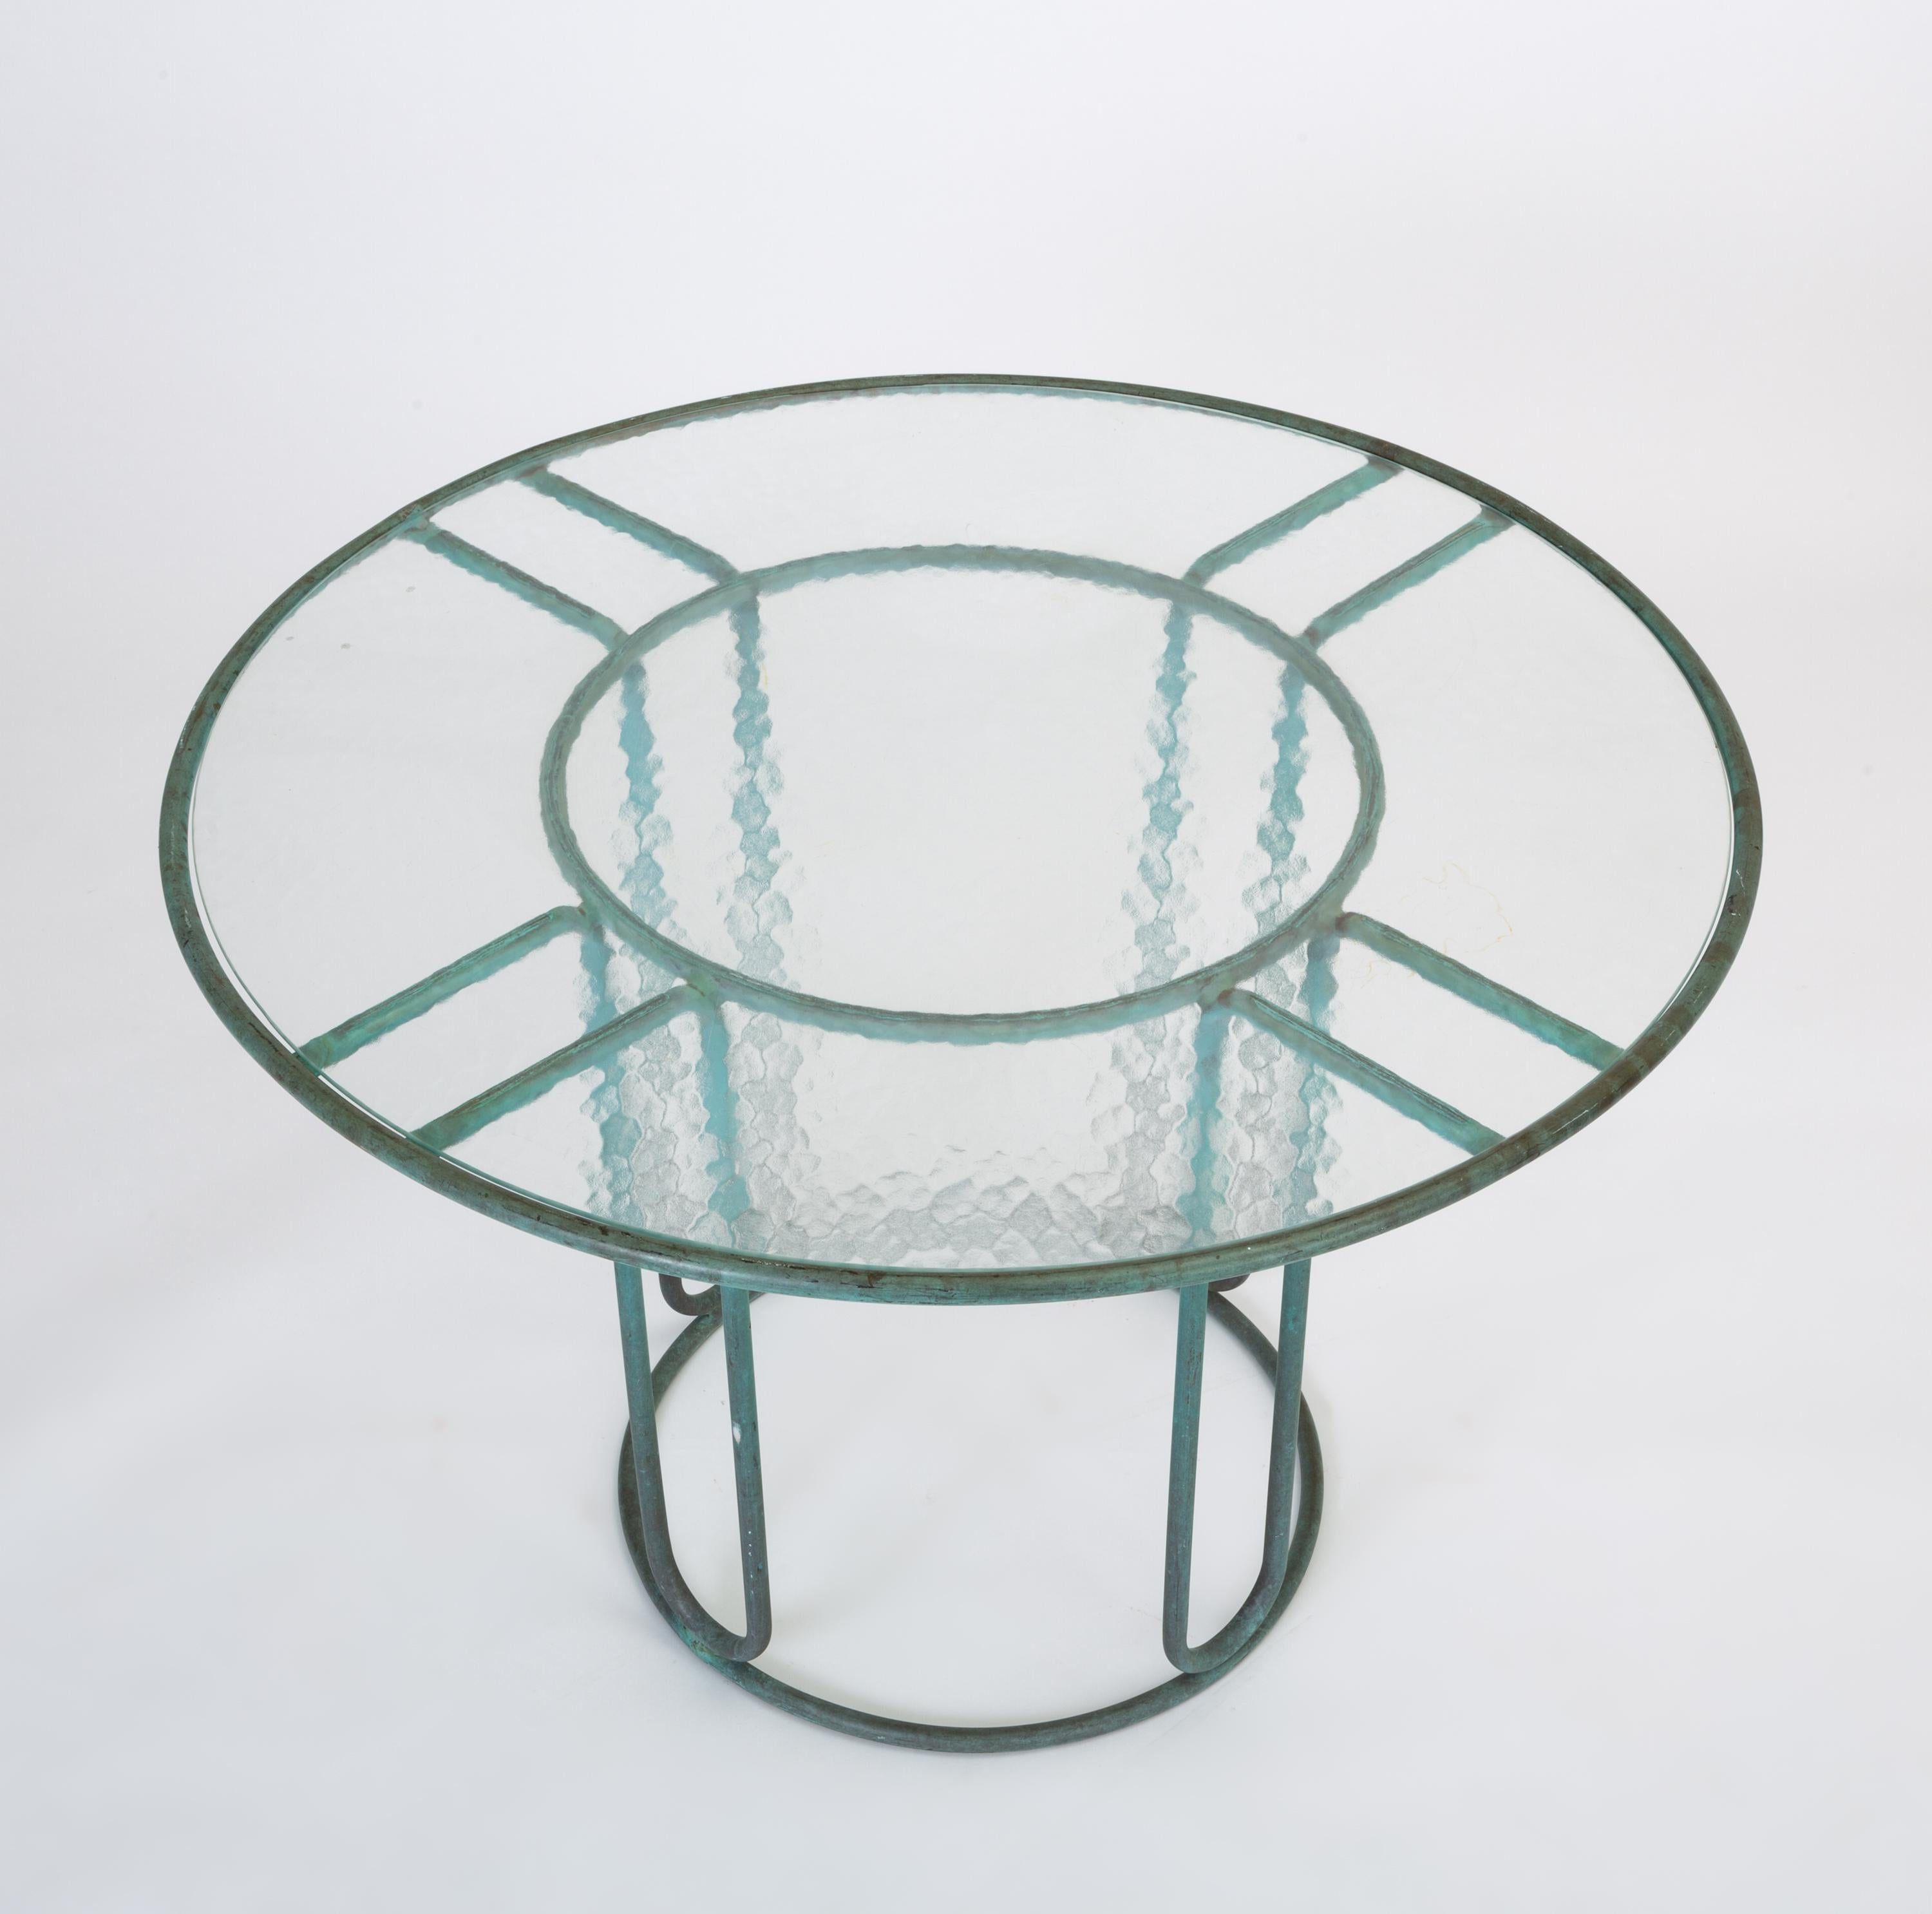 Hammered Walter Lamb Round Patio Dining Table with Glass Top